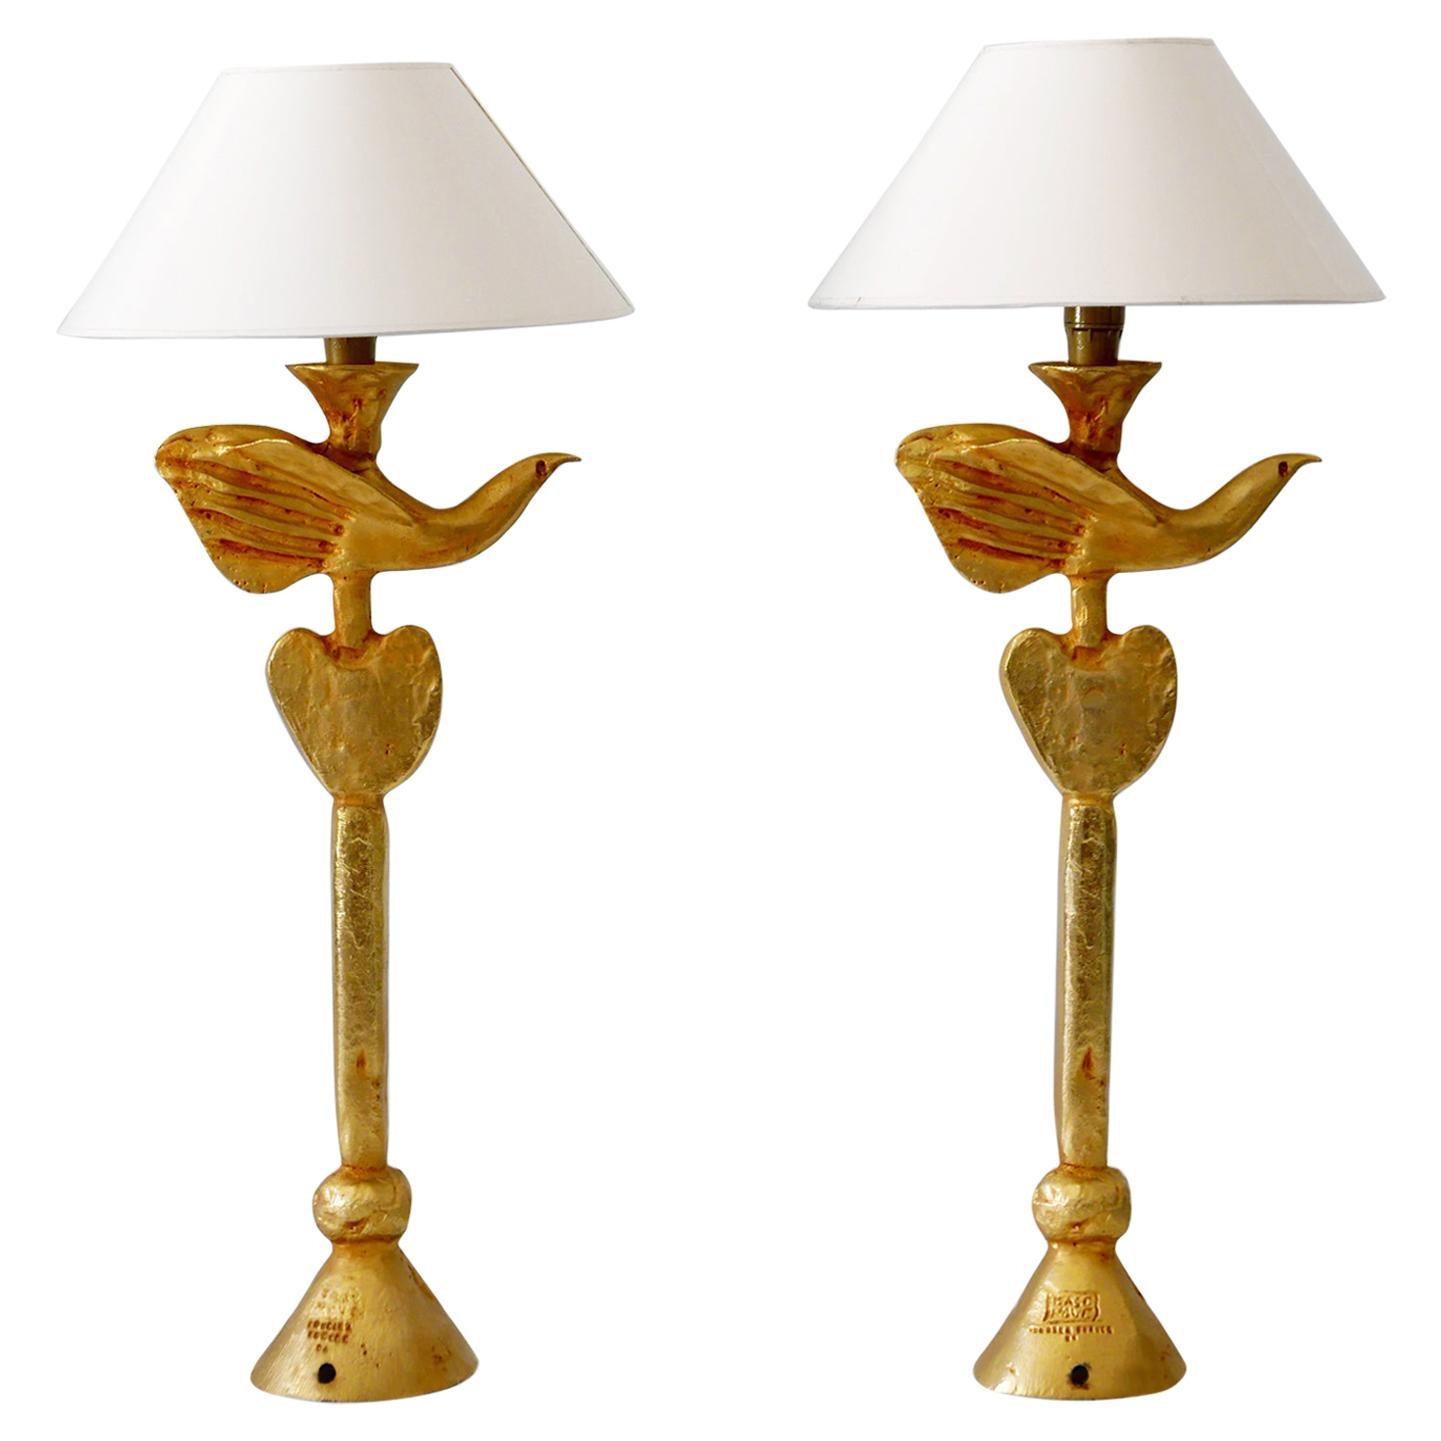 Set of Two Gilt Bronze Dove Table Lamps by Pierre Casenove for Fondica France